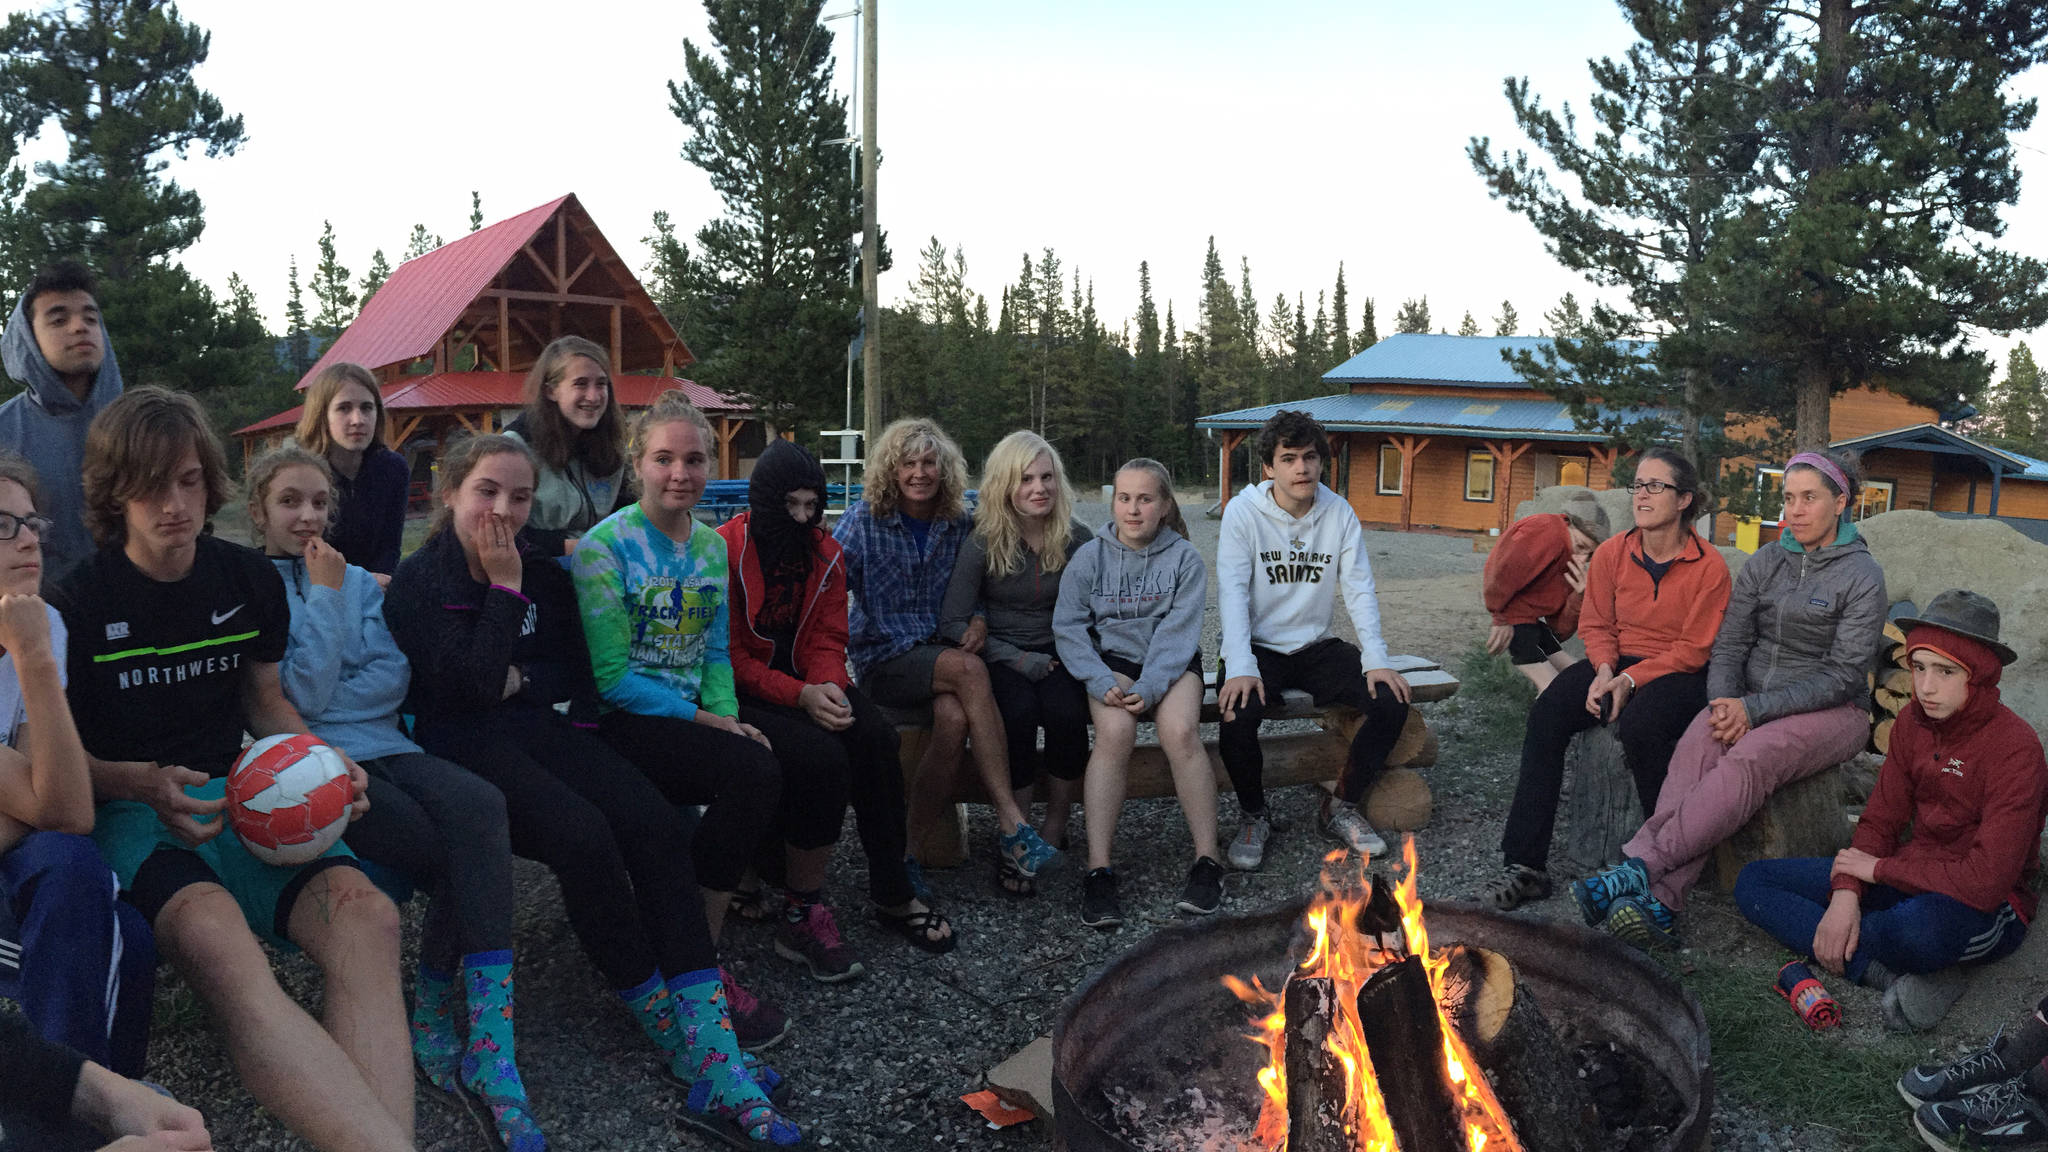 The Juneau-Douglas High School cross country team hangs out around a campfire at the Mt. Lorne Campground in the Yukon, Aug. 3. The first meet of the high school cross country season is Aug. 26 at Sandy Beach. (Photo courtesy of Tristan Knutson Lombardo)